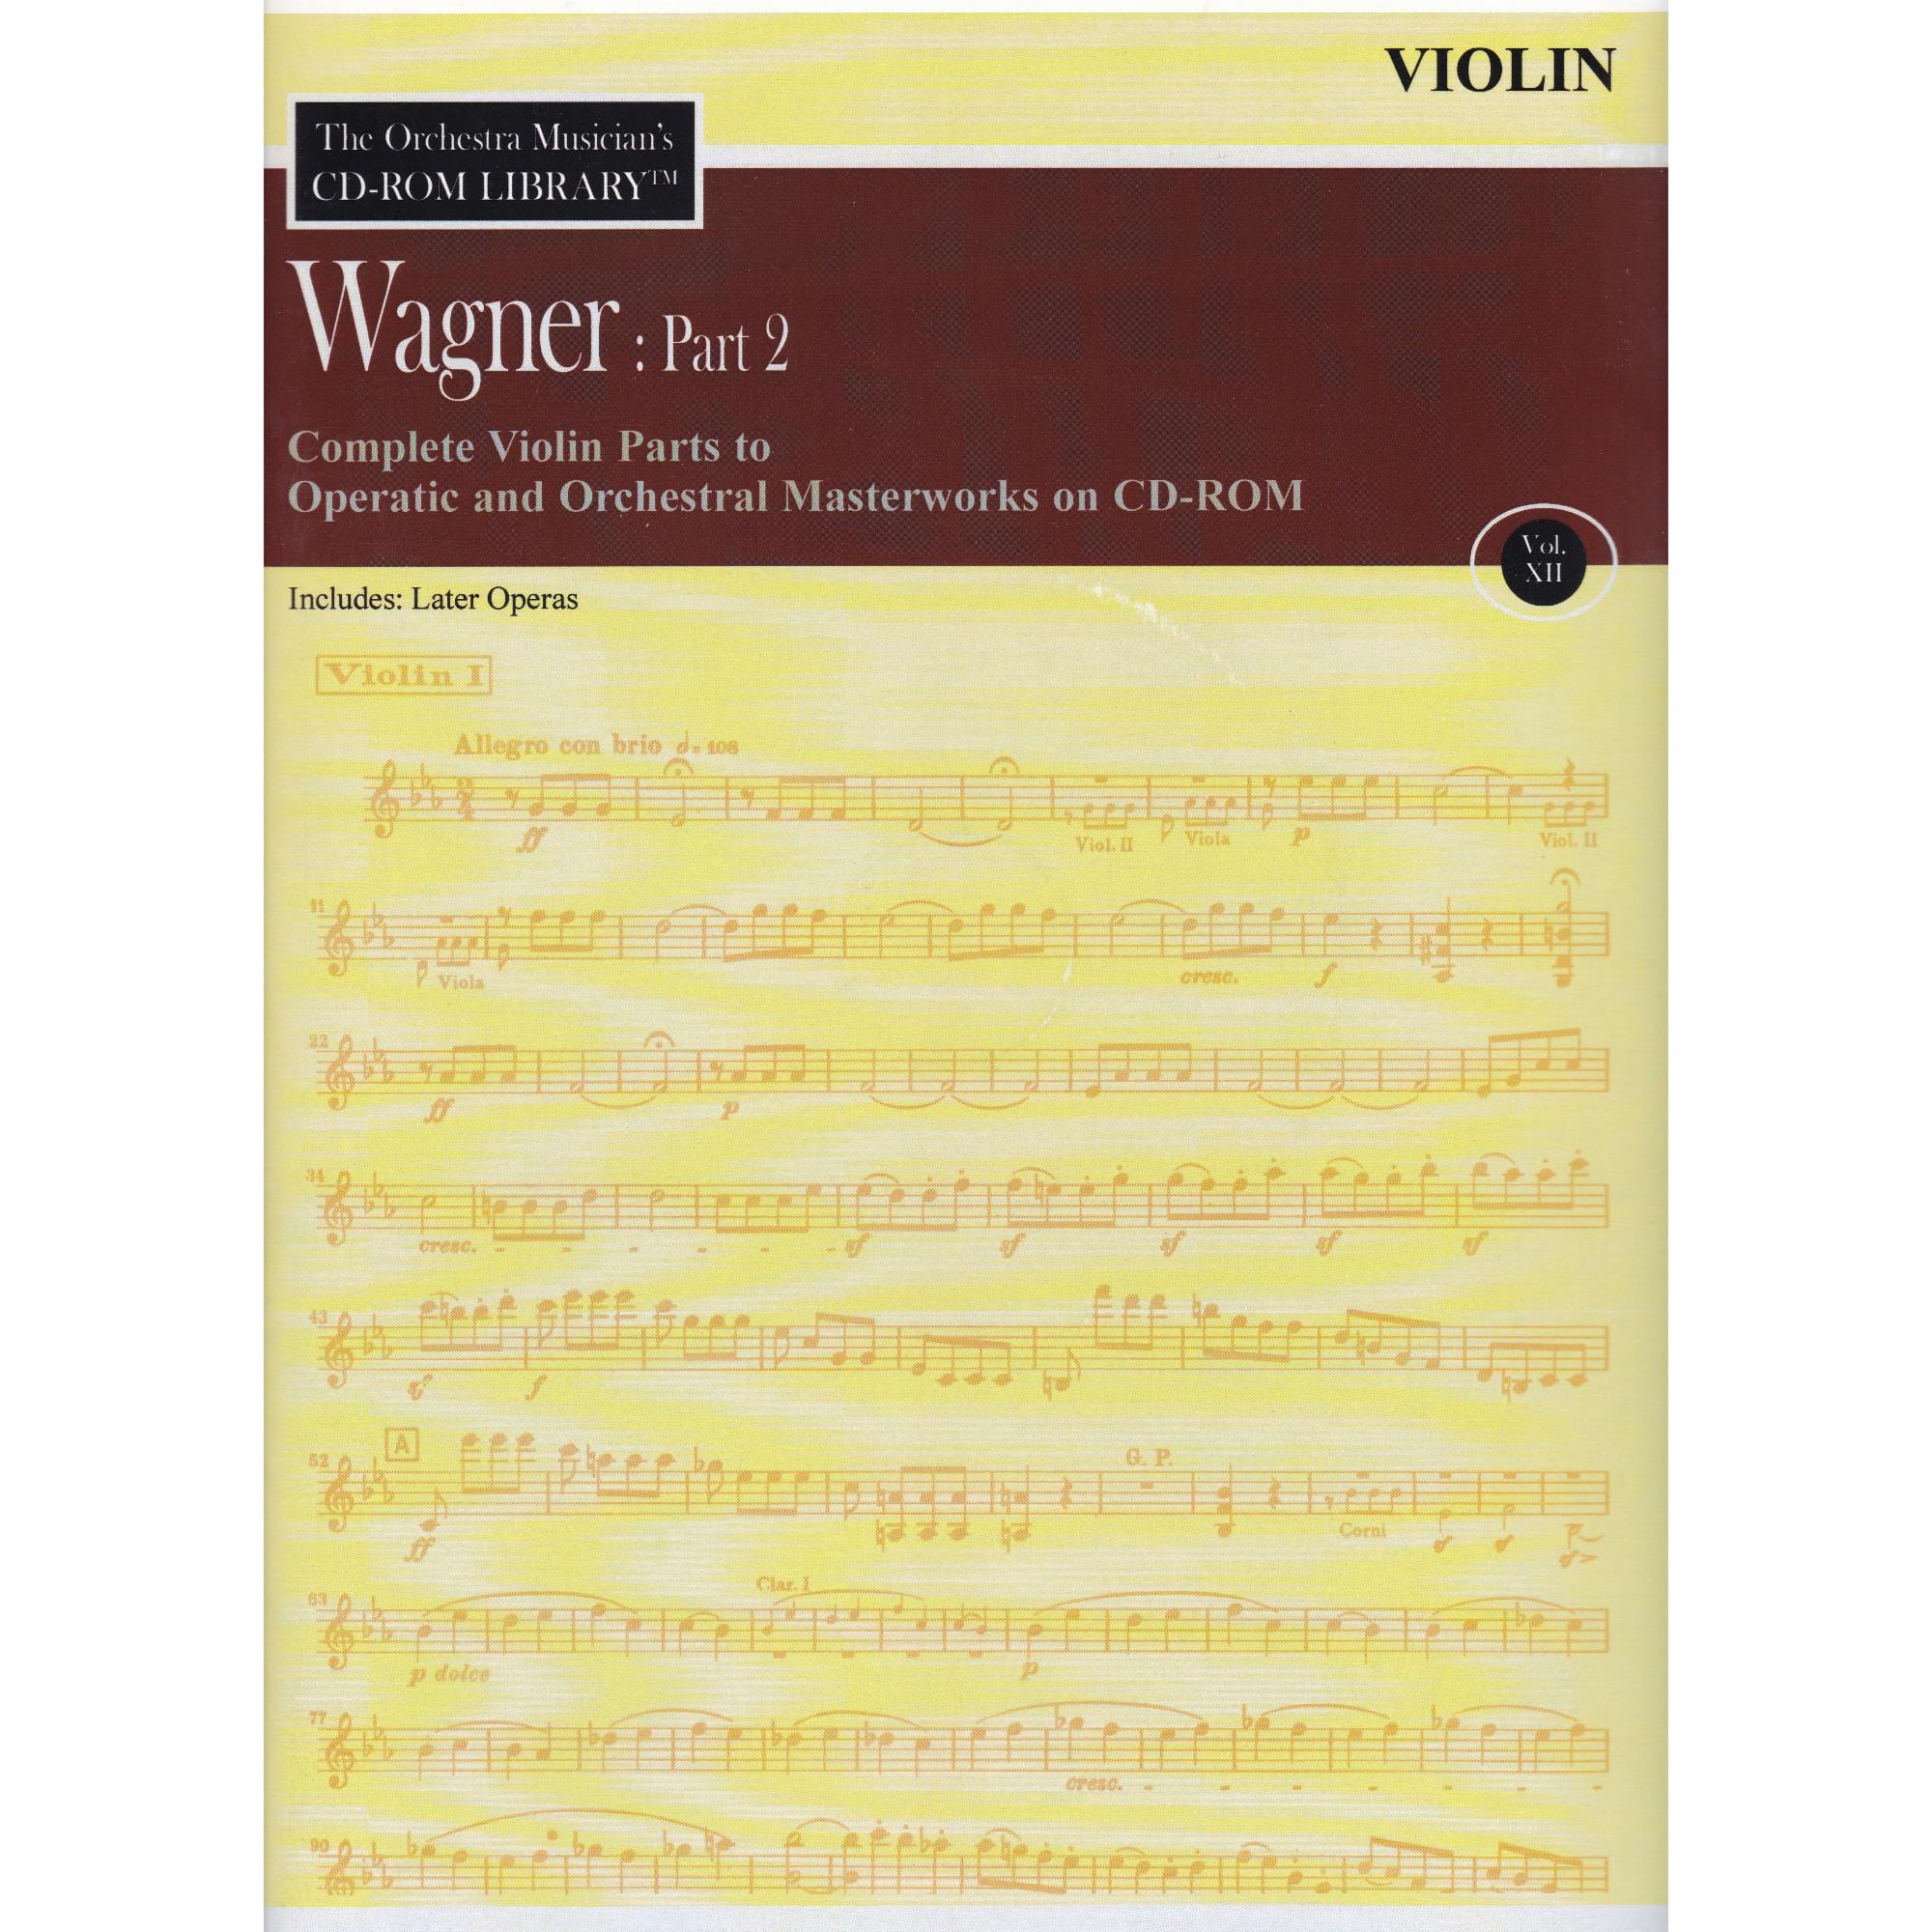 Complete Parts to Wagner's Operas on CD-ROM, Vol. II